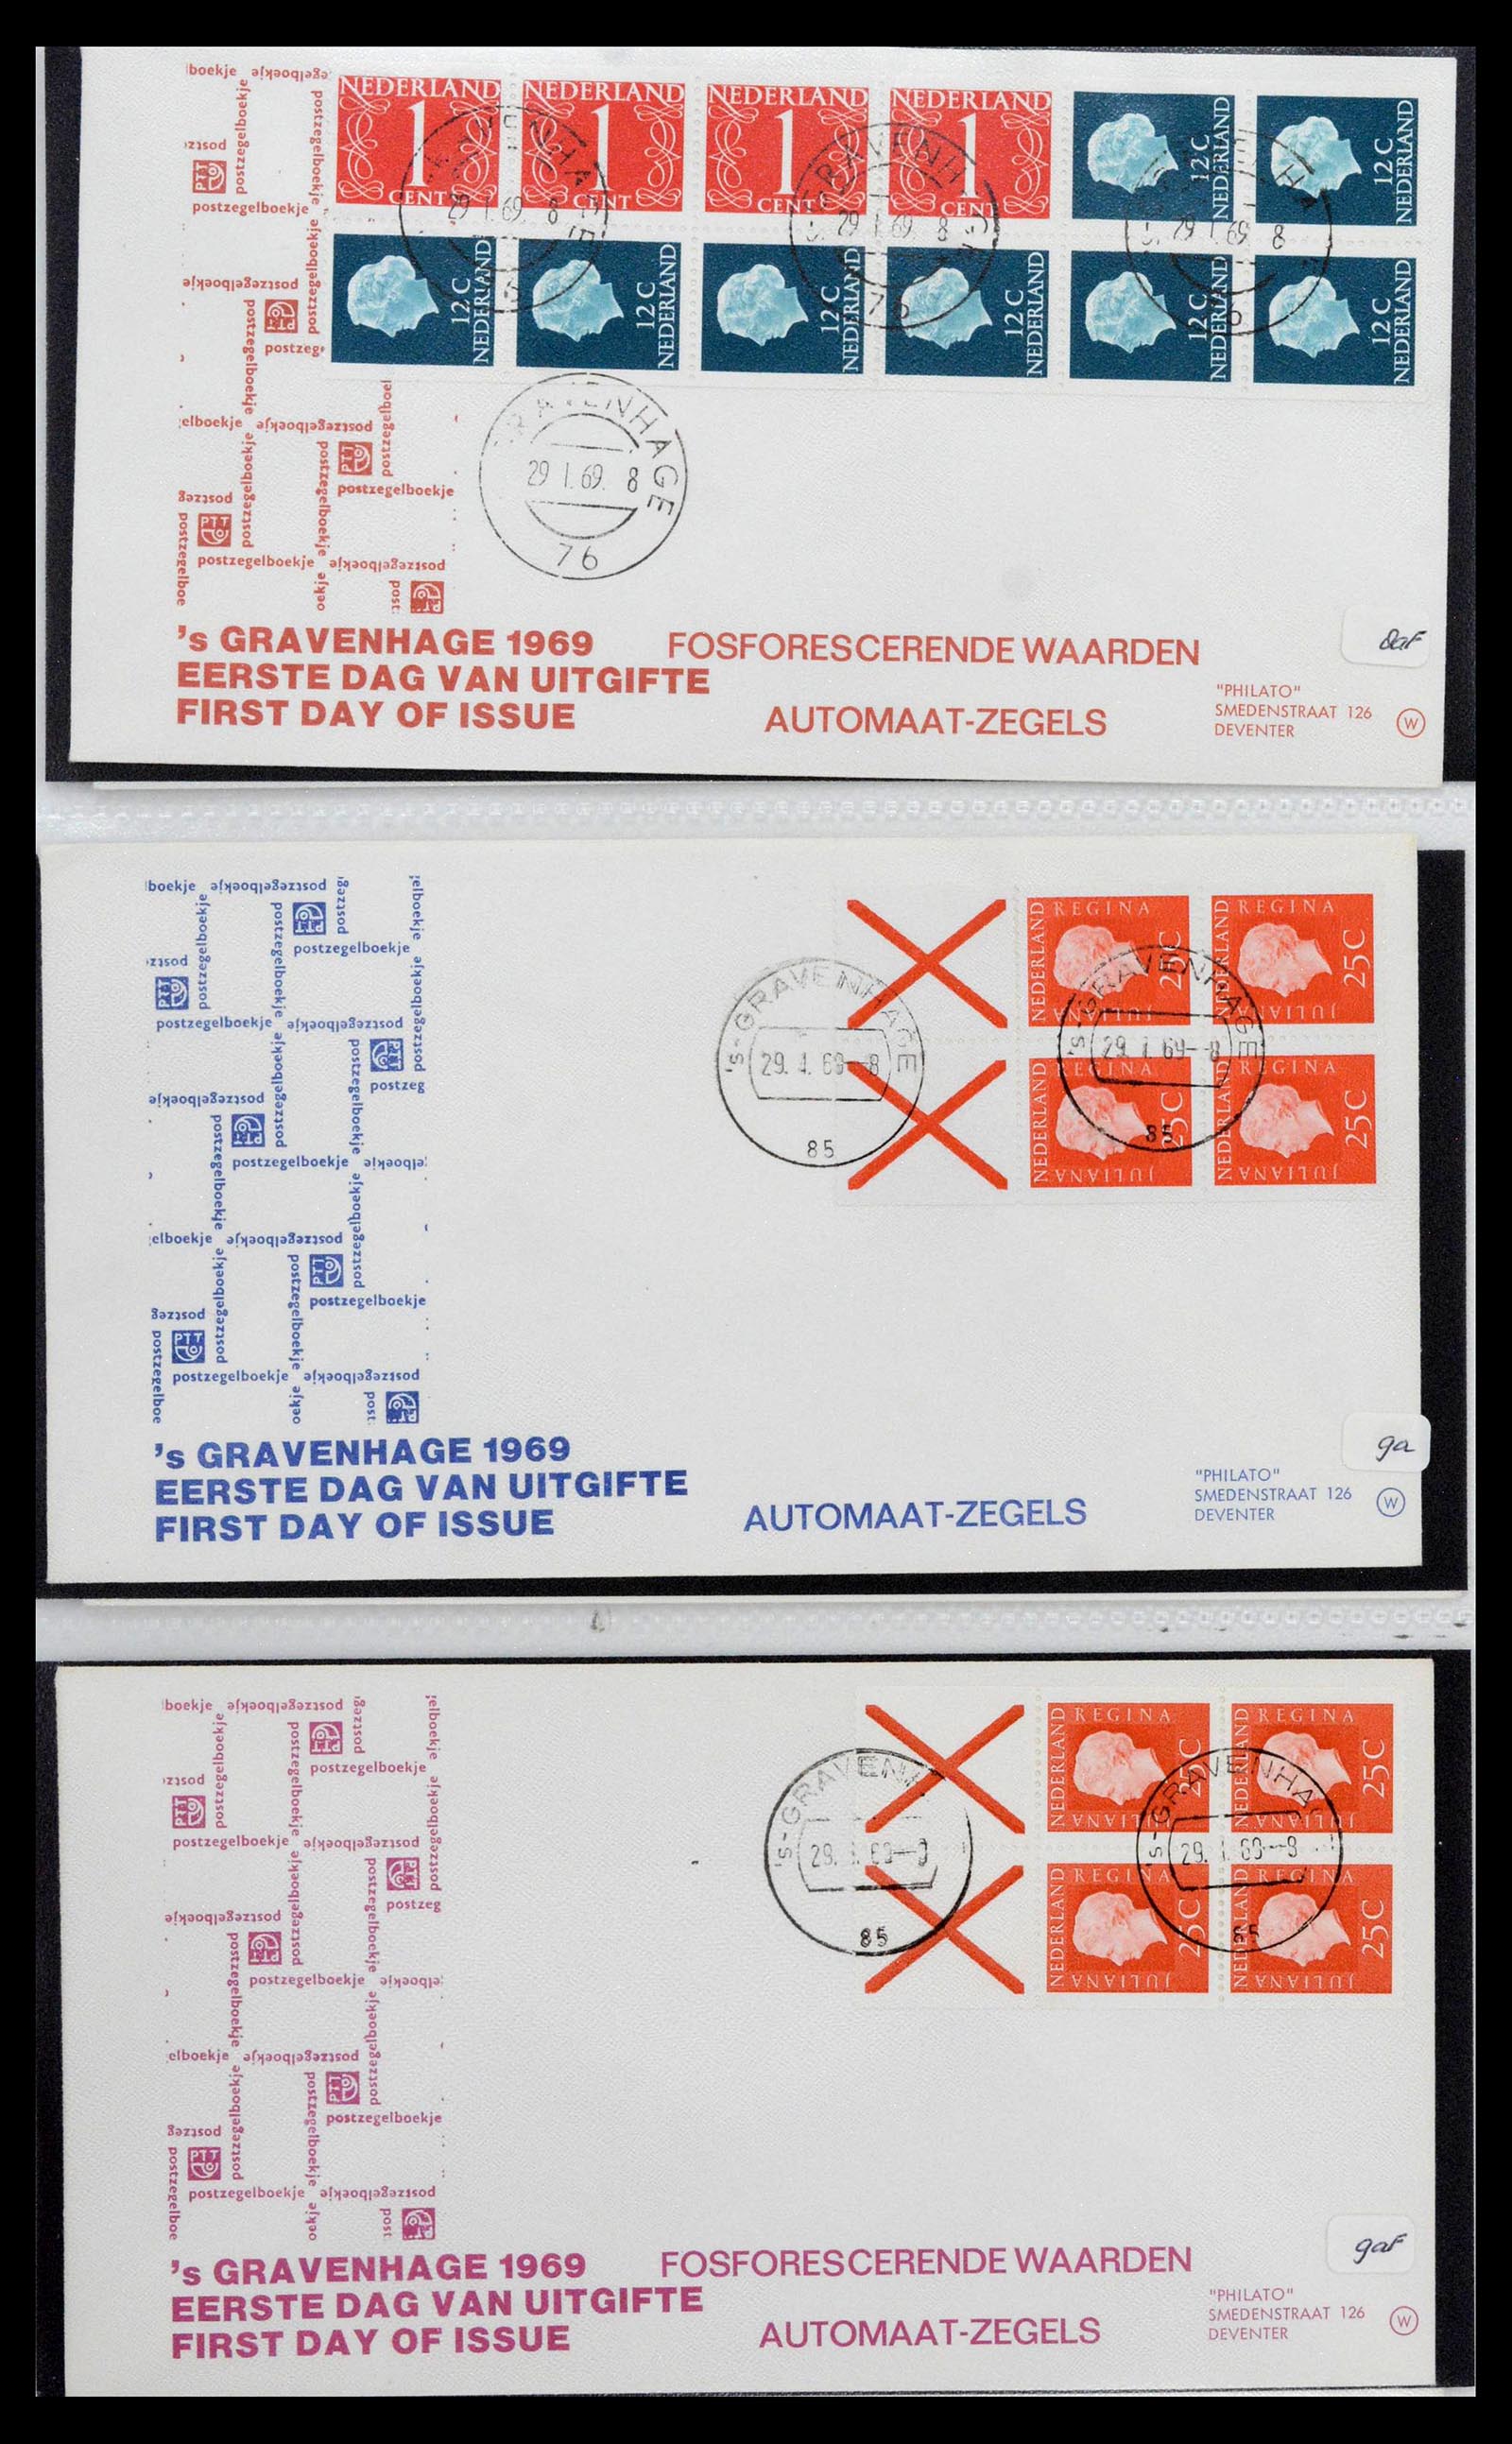 38559 0085 - Stamp collection 38559 Netherlands special first day covers.